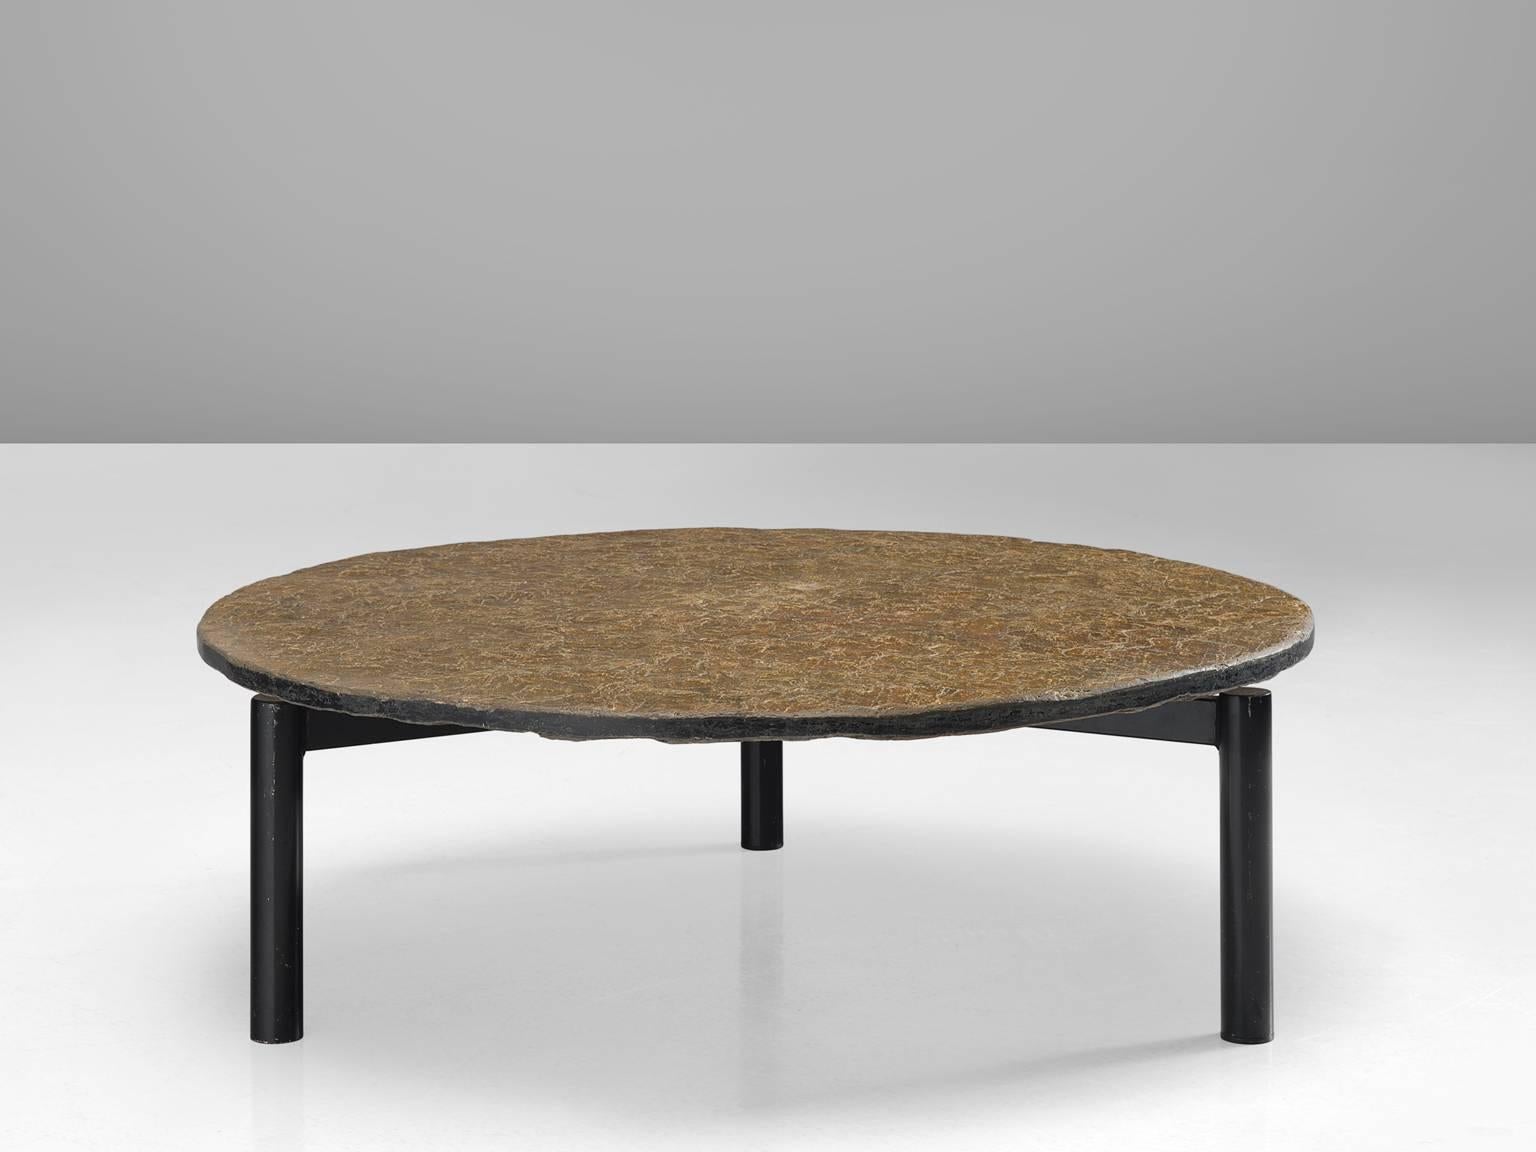 Cocktail table, slate, metal, Northern-Europe, 1970s. 

This organic and robust coffee or cocktail table is from the 1970s and is part of the midcentury design collection. The thick round top is supported by a metal tripod frame that shows traits of